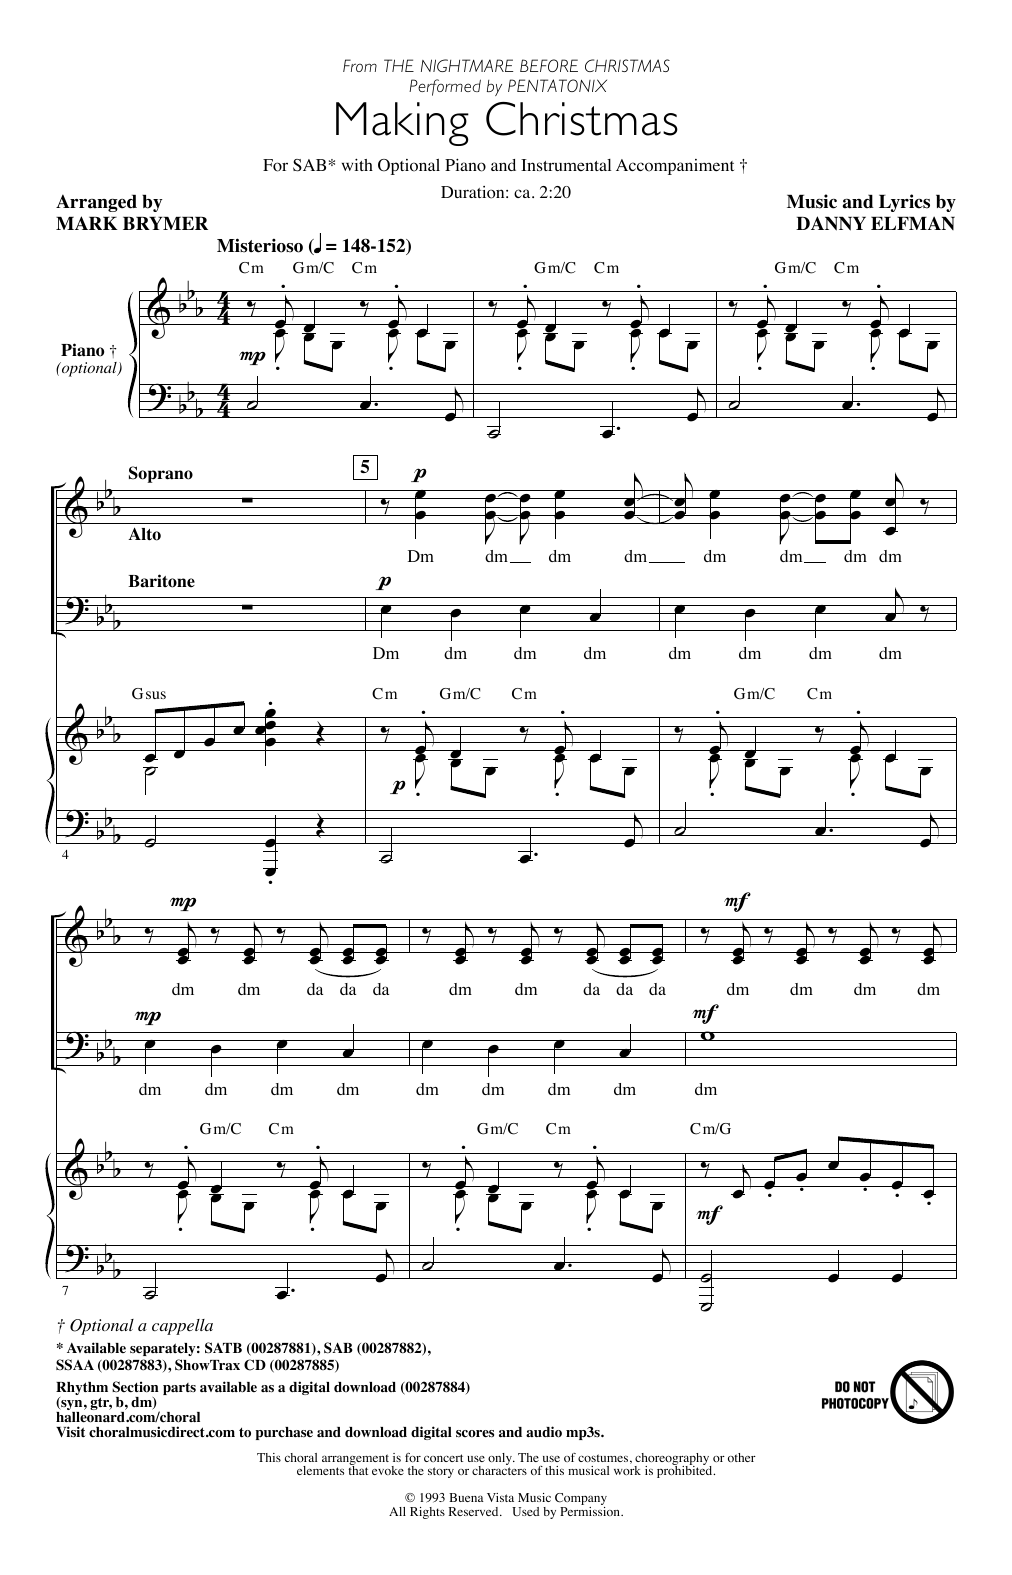 Download Pentatonix Making Christmas (from The Nightmare Be Sheet Music